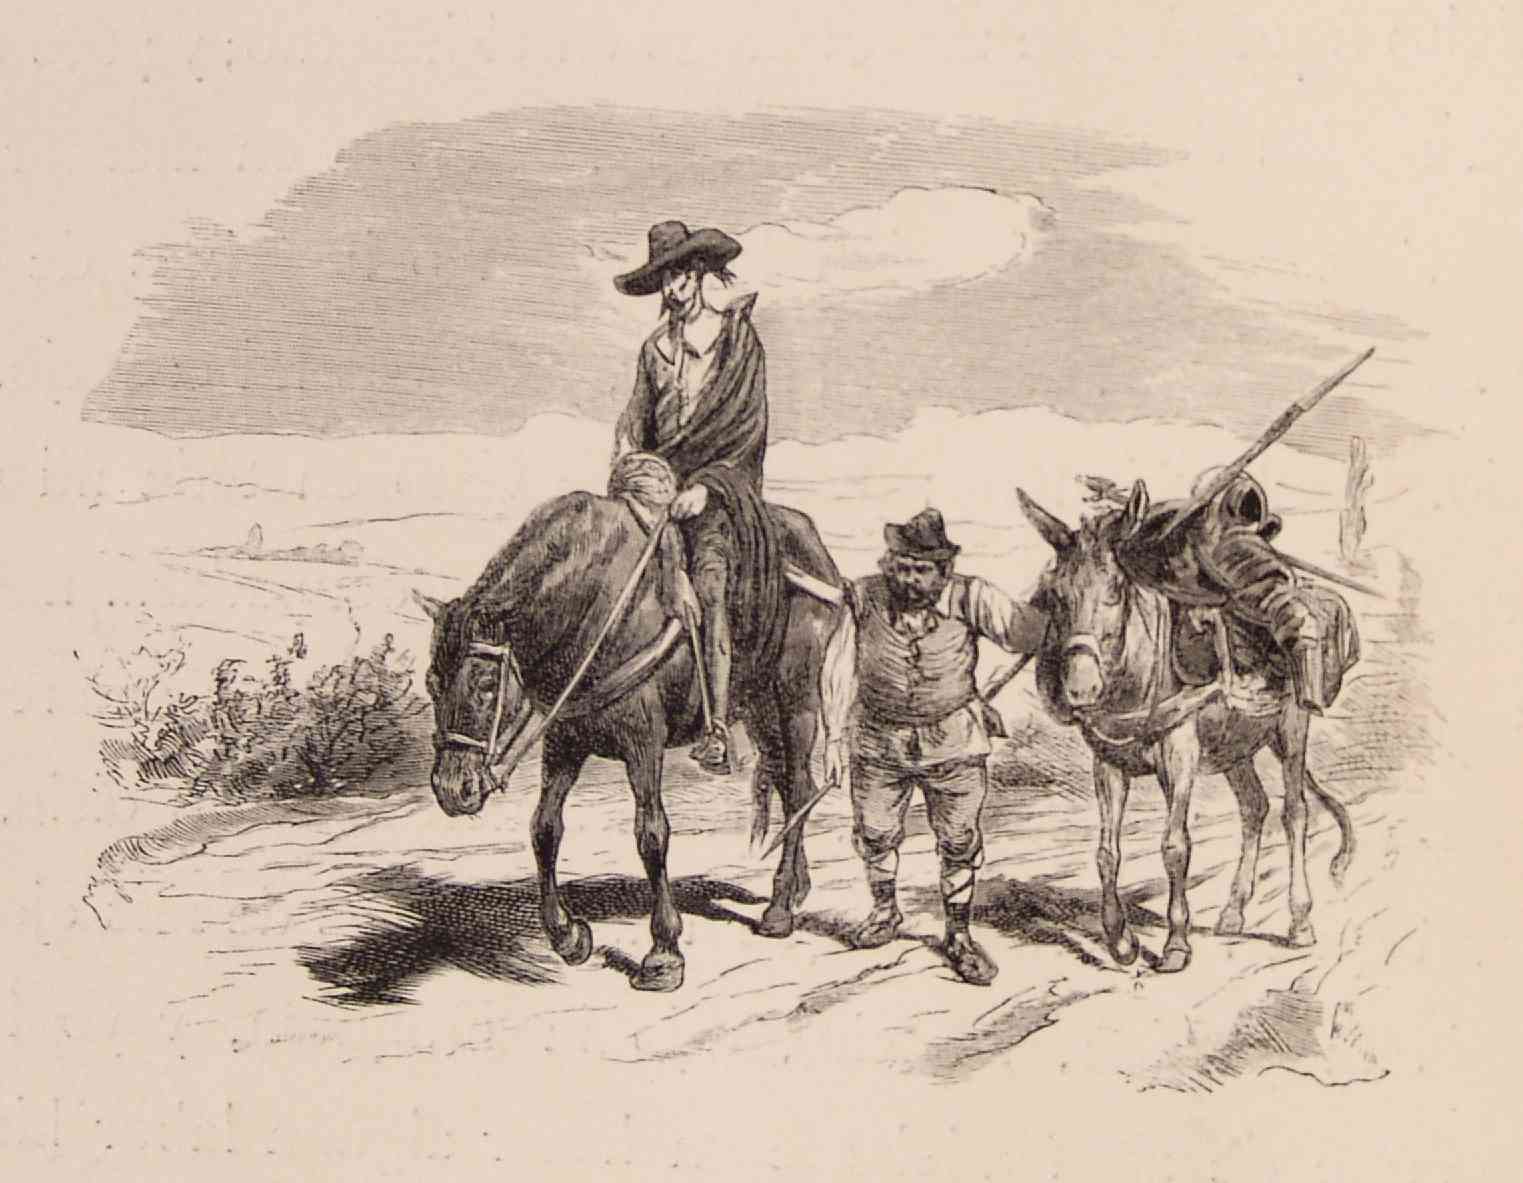 a man in an old fashion rides on a horse with two men